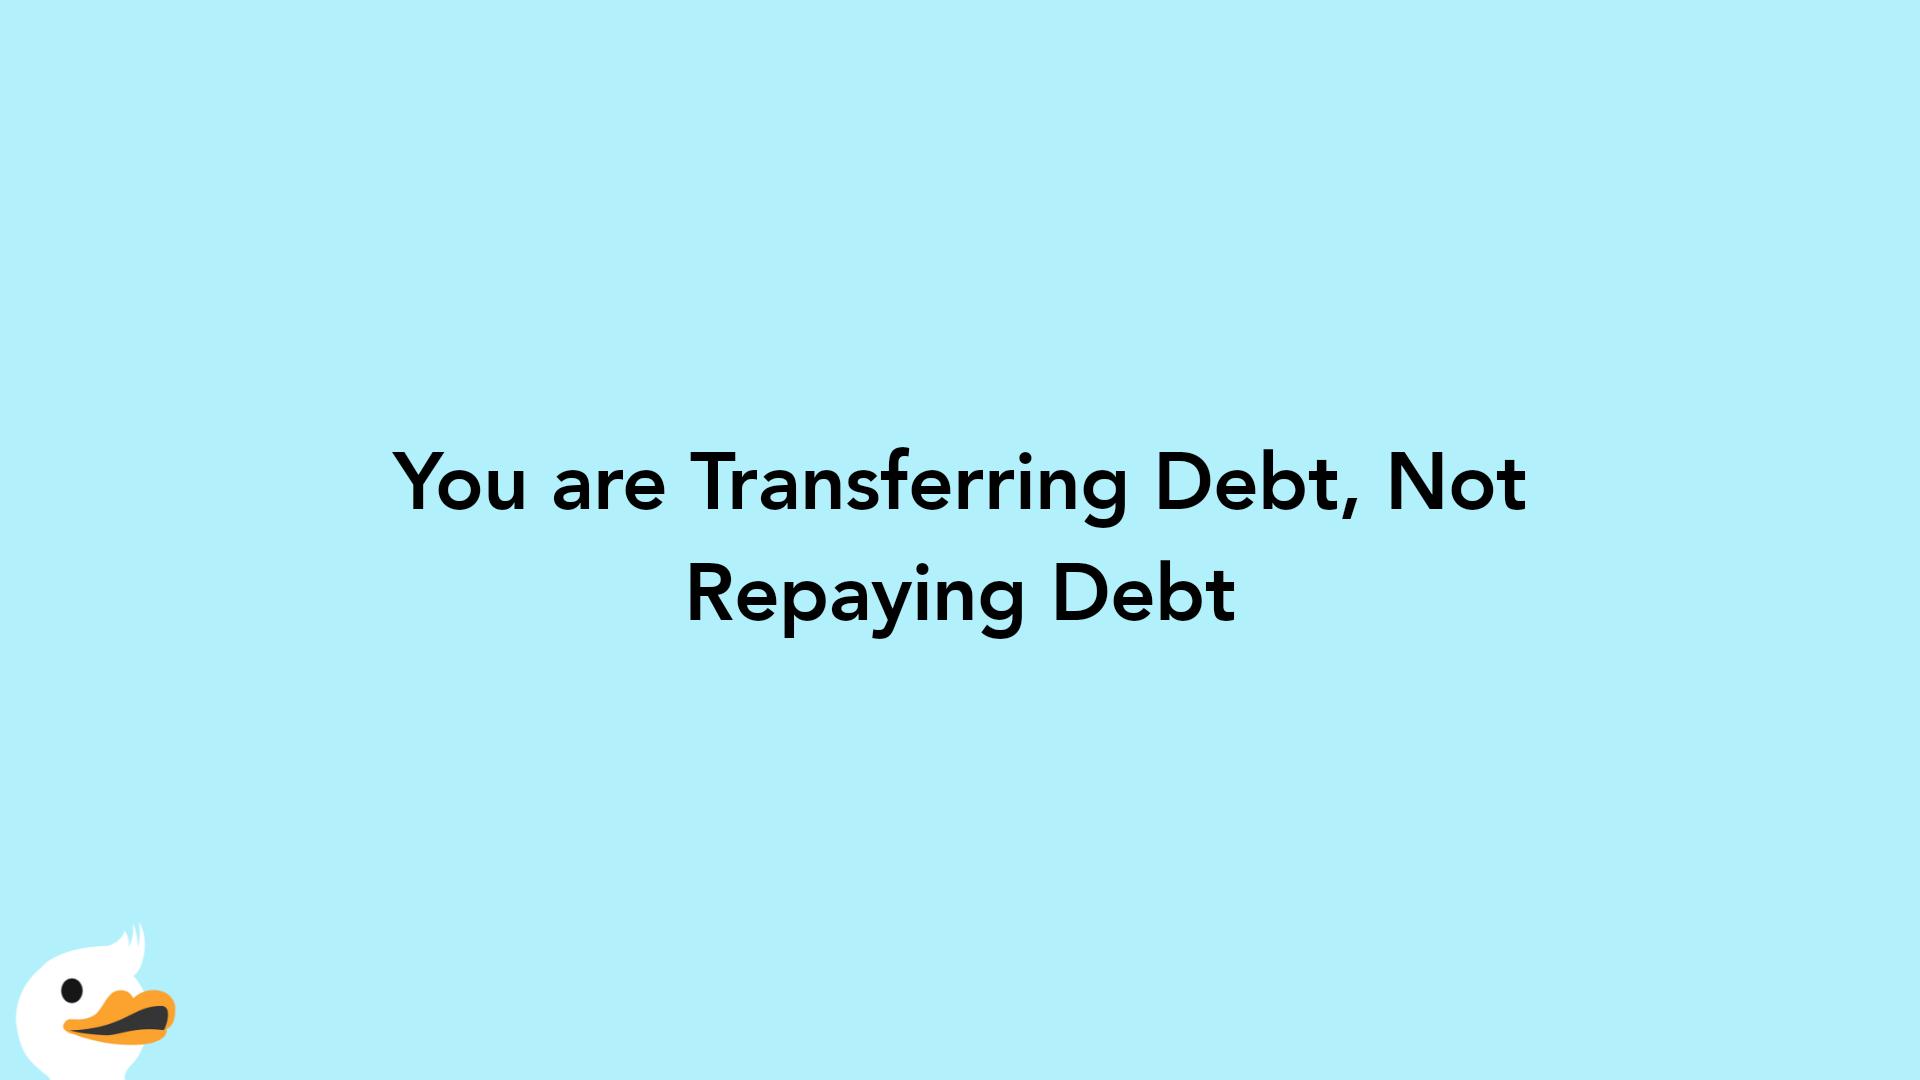 You are Transferring Debt, Not Repaying Debt